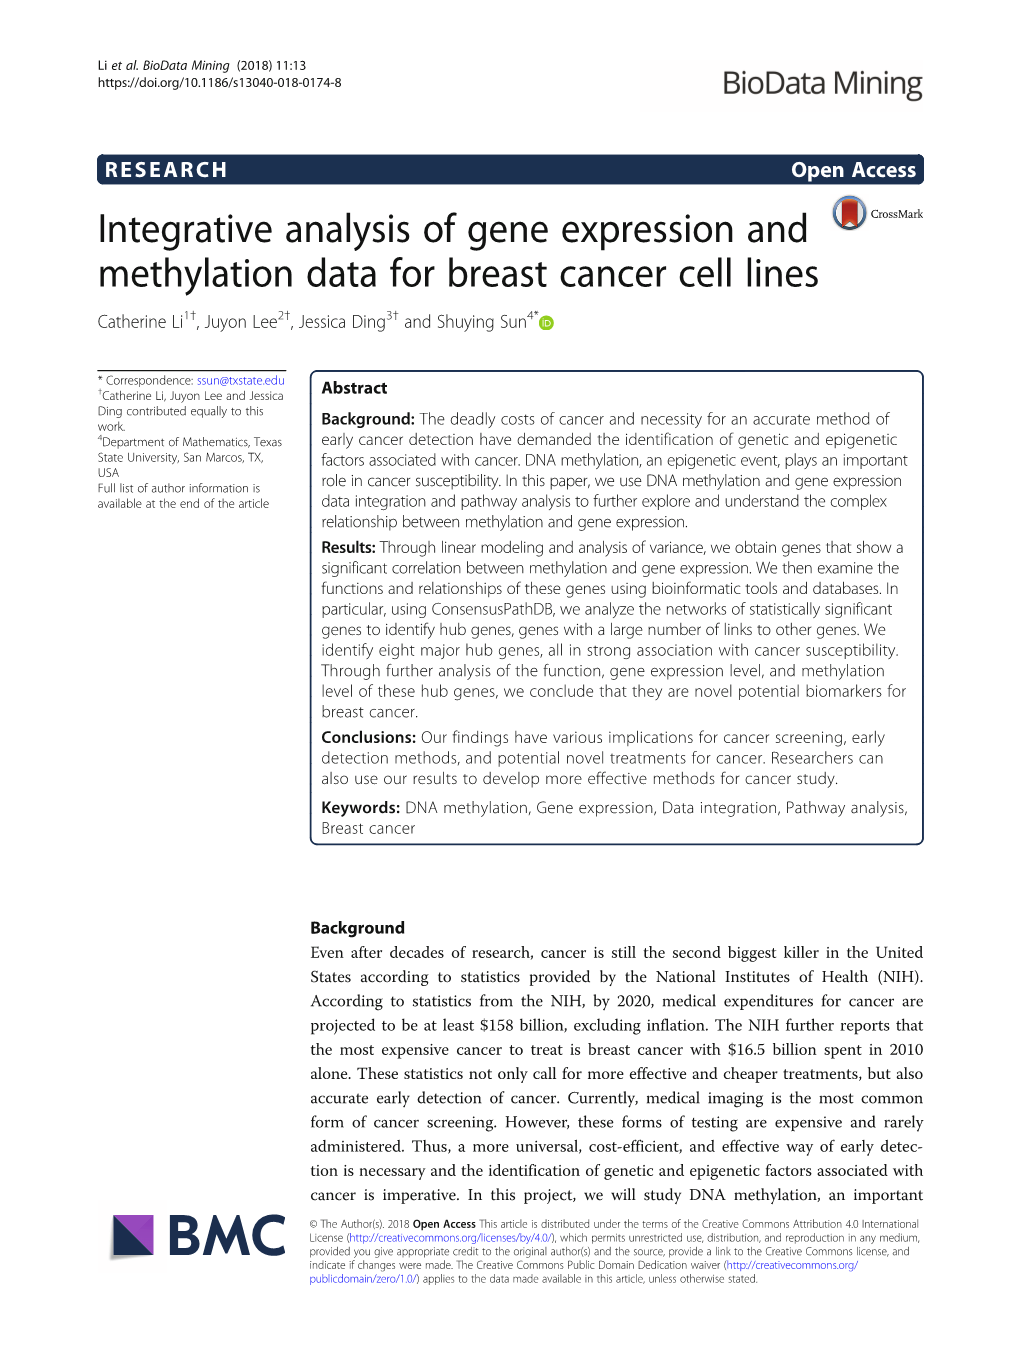 Integrative Analysis of Gene Expression and Methylation Data for Breast Cancer Cell Lines Catherine Li1†, Juyon Lee2†, Jessica Ding3† and Shuying Sun4*